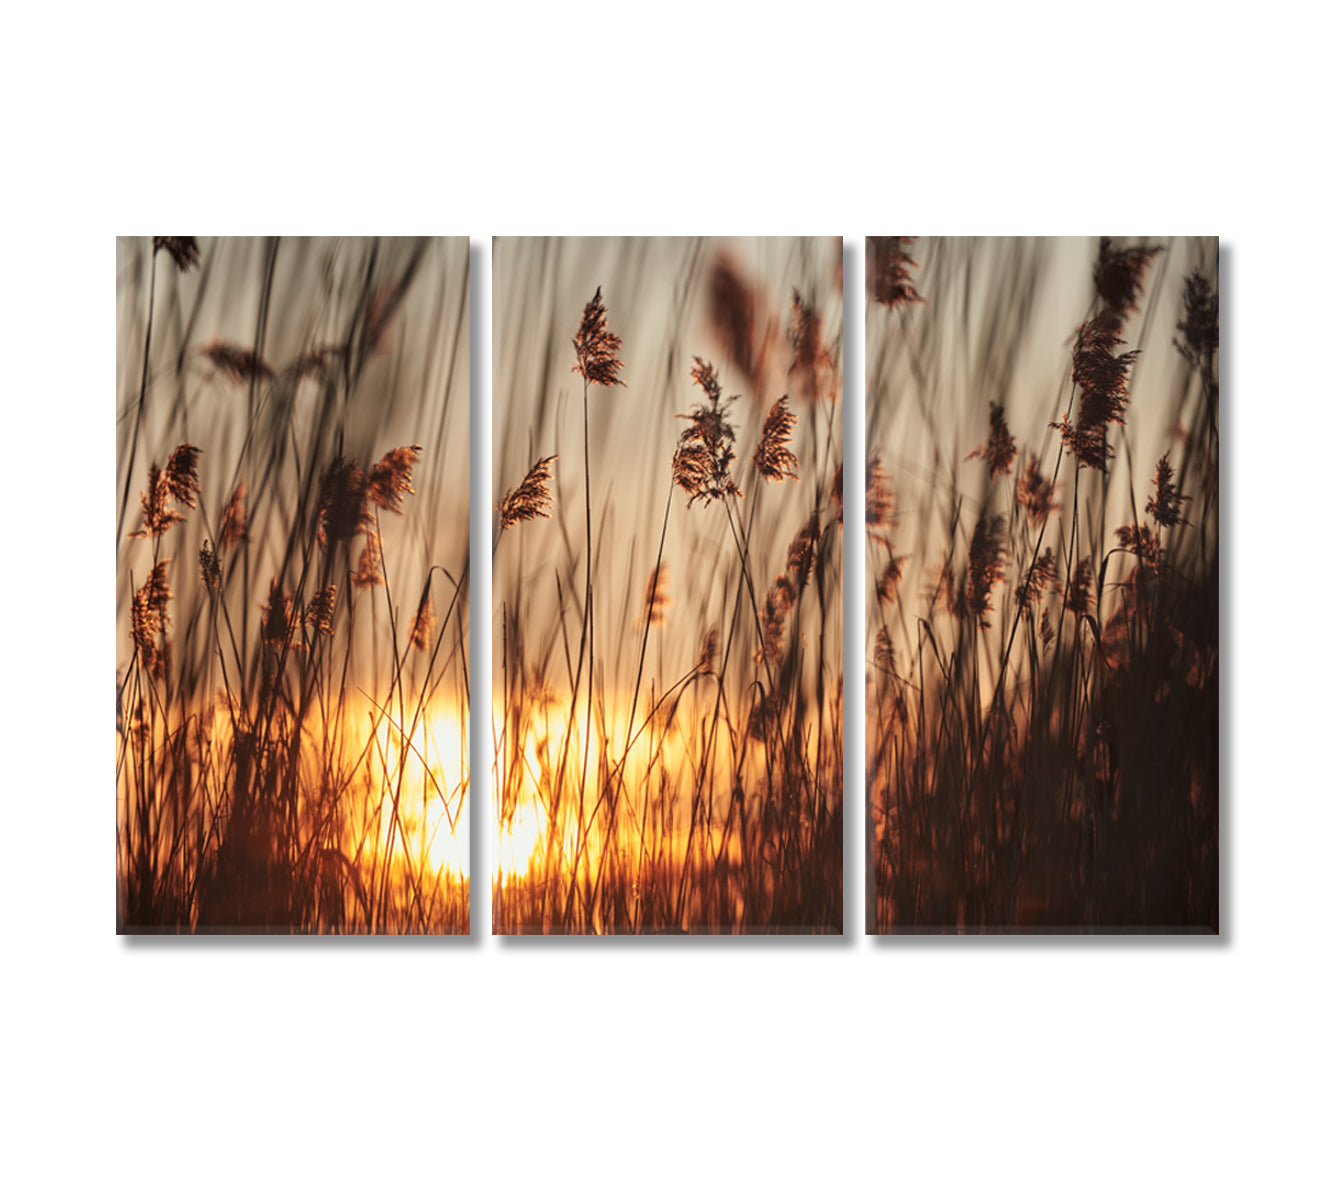 Reeds in Rays of Sun Canvas Print-Canvas Print-CetArt-3 Panels-36x24 inches-CetArt